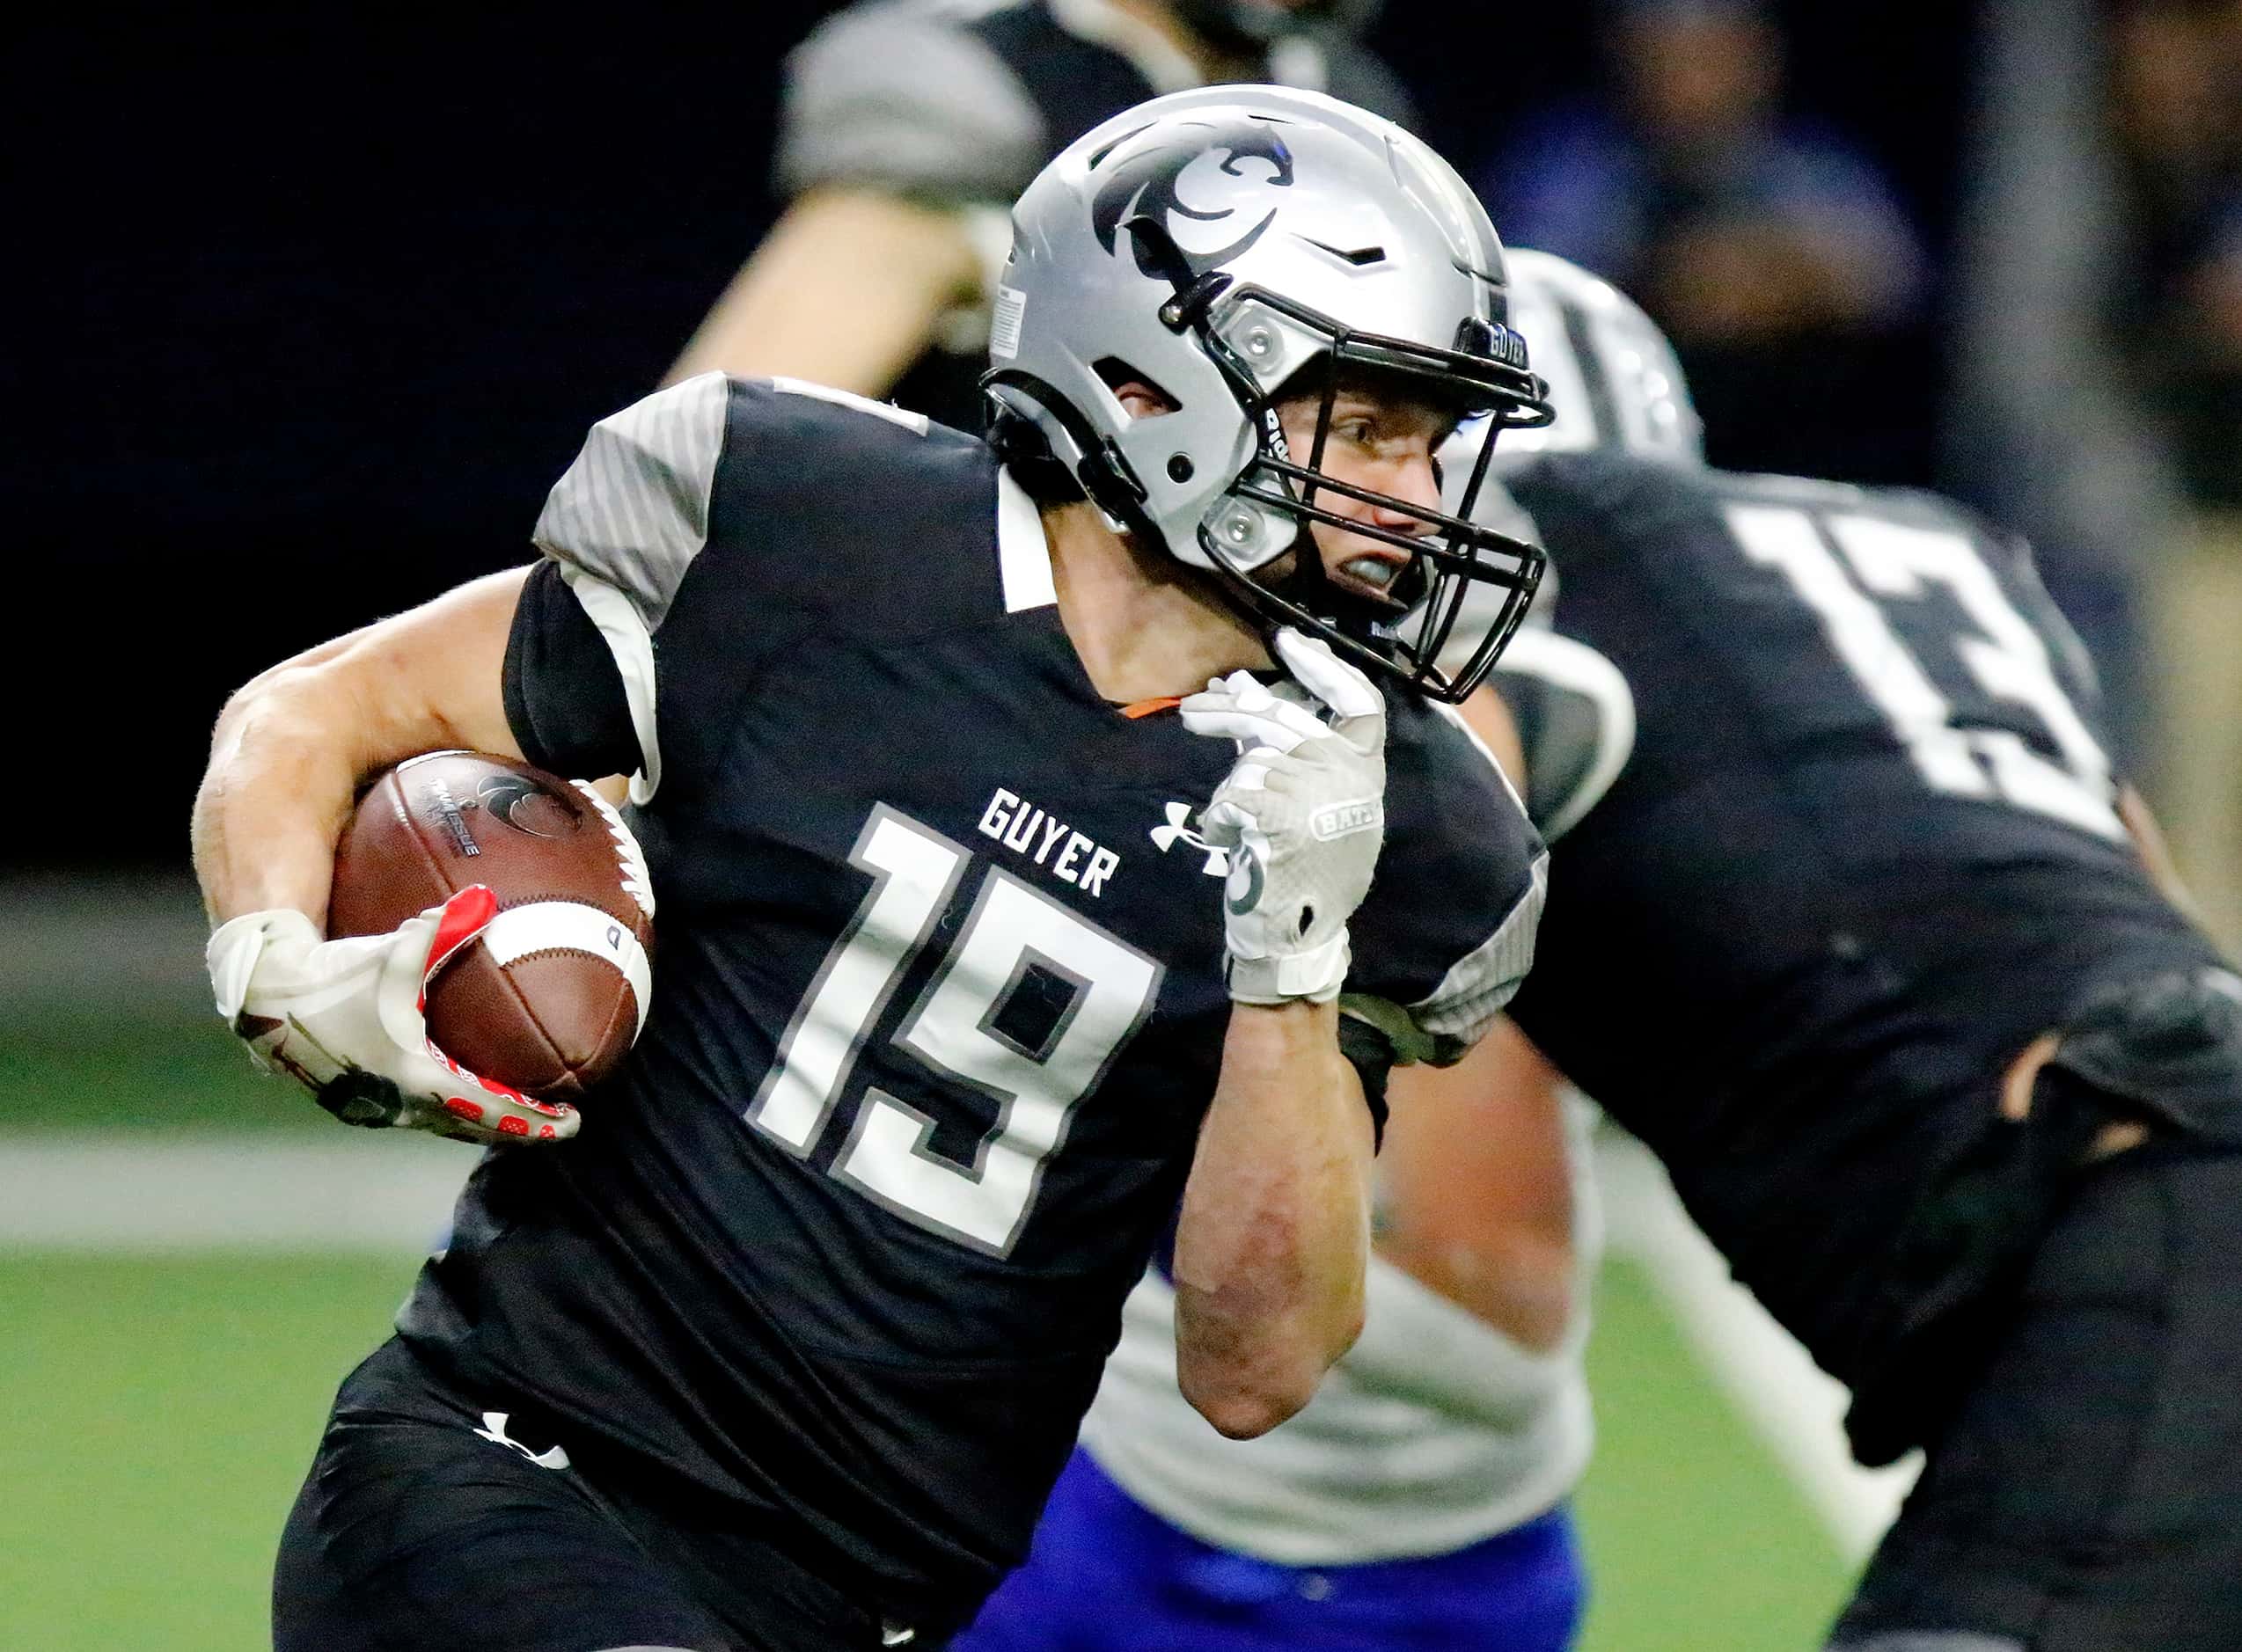 Guyer High School wide receiver Grayson Obara (19) runs a reverse for a first down during...